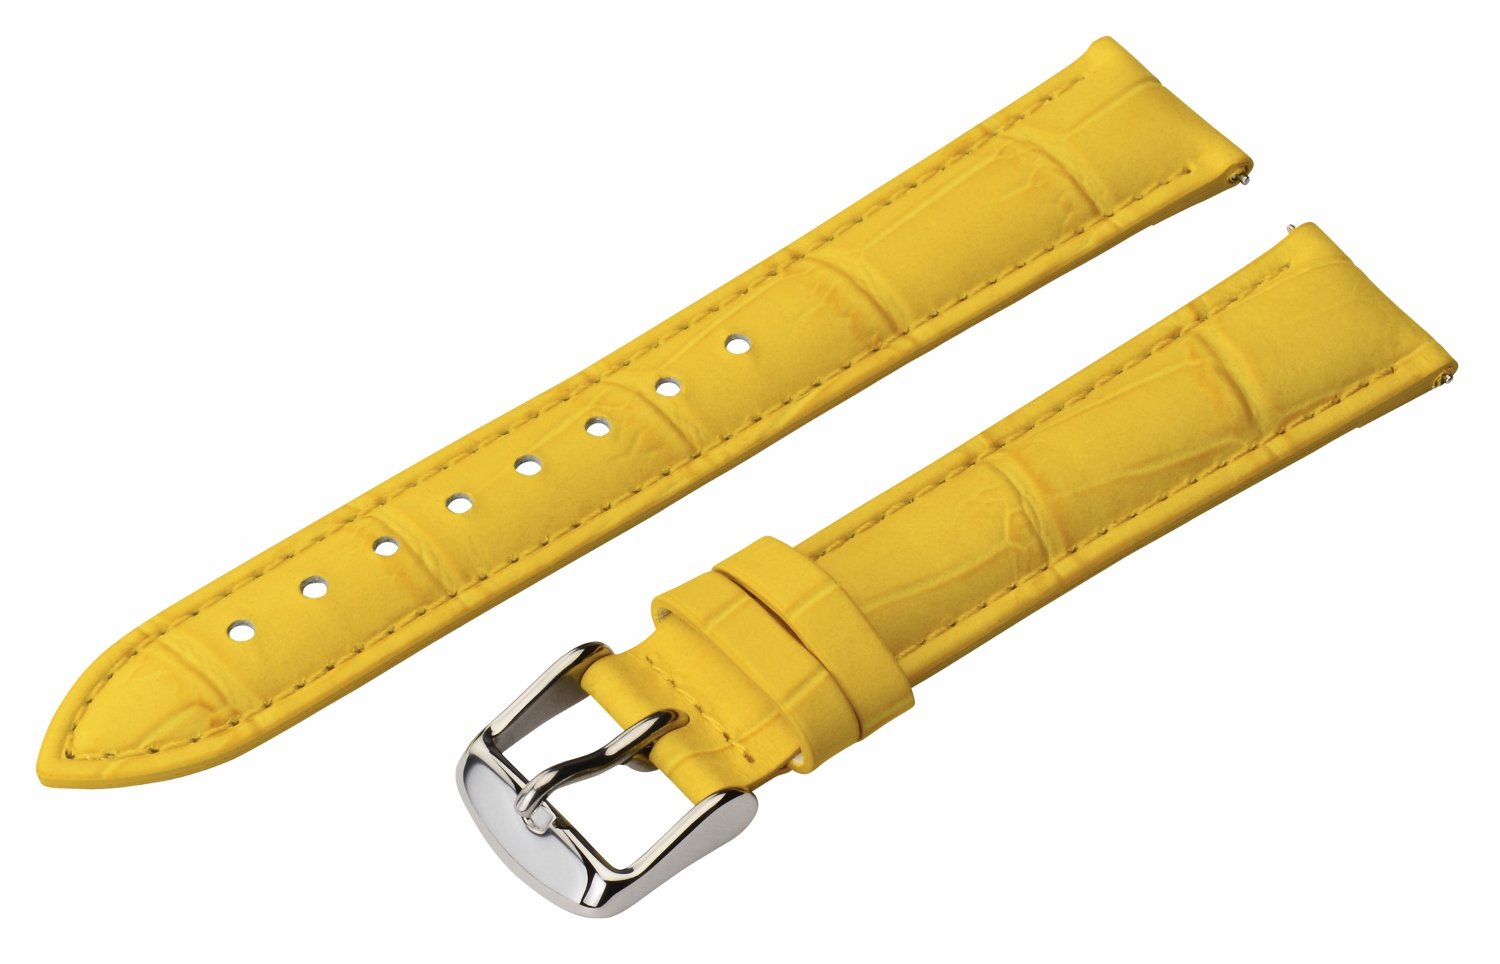 Clockwork Synergy - 2 Piece Ss Leather Classic Croco Grain Interchangeable Replacement Watch Band Strap 22mm - Solid Yellow - Men Women